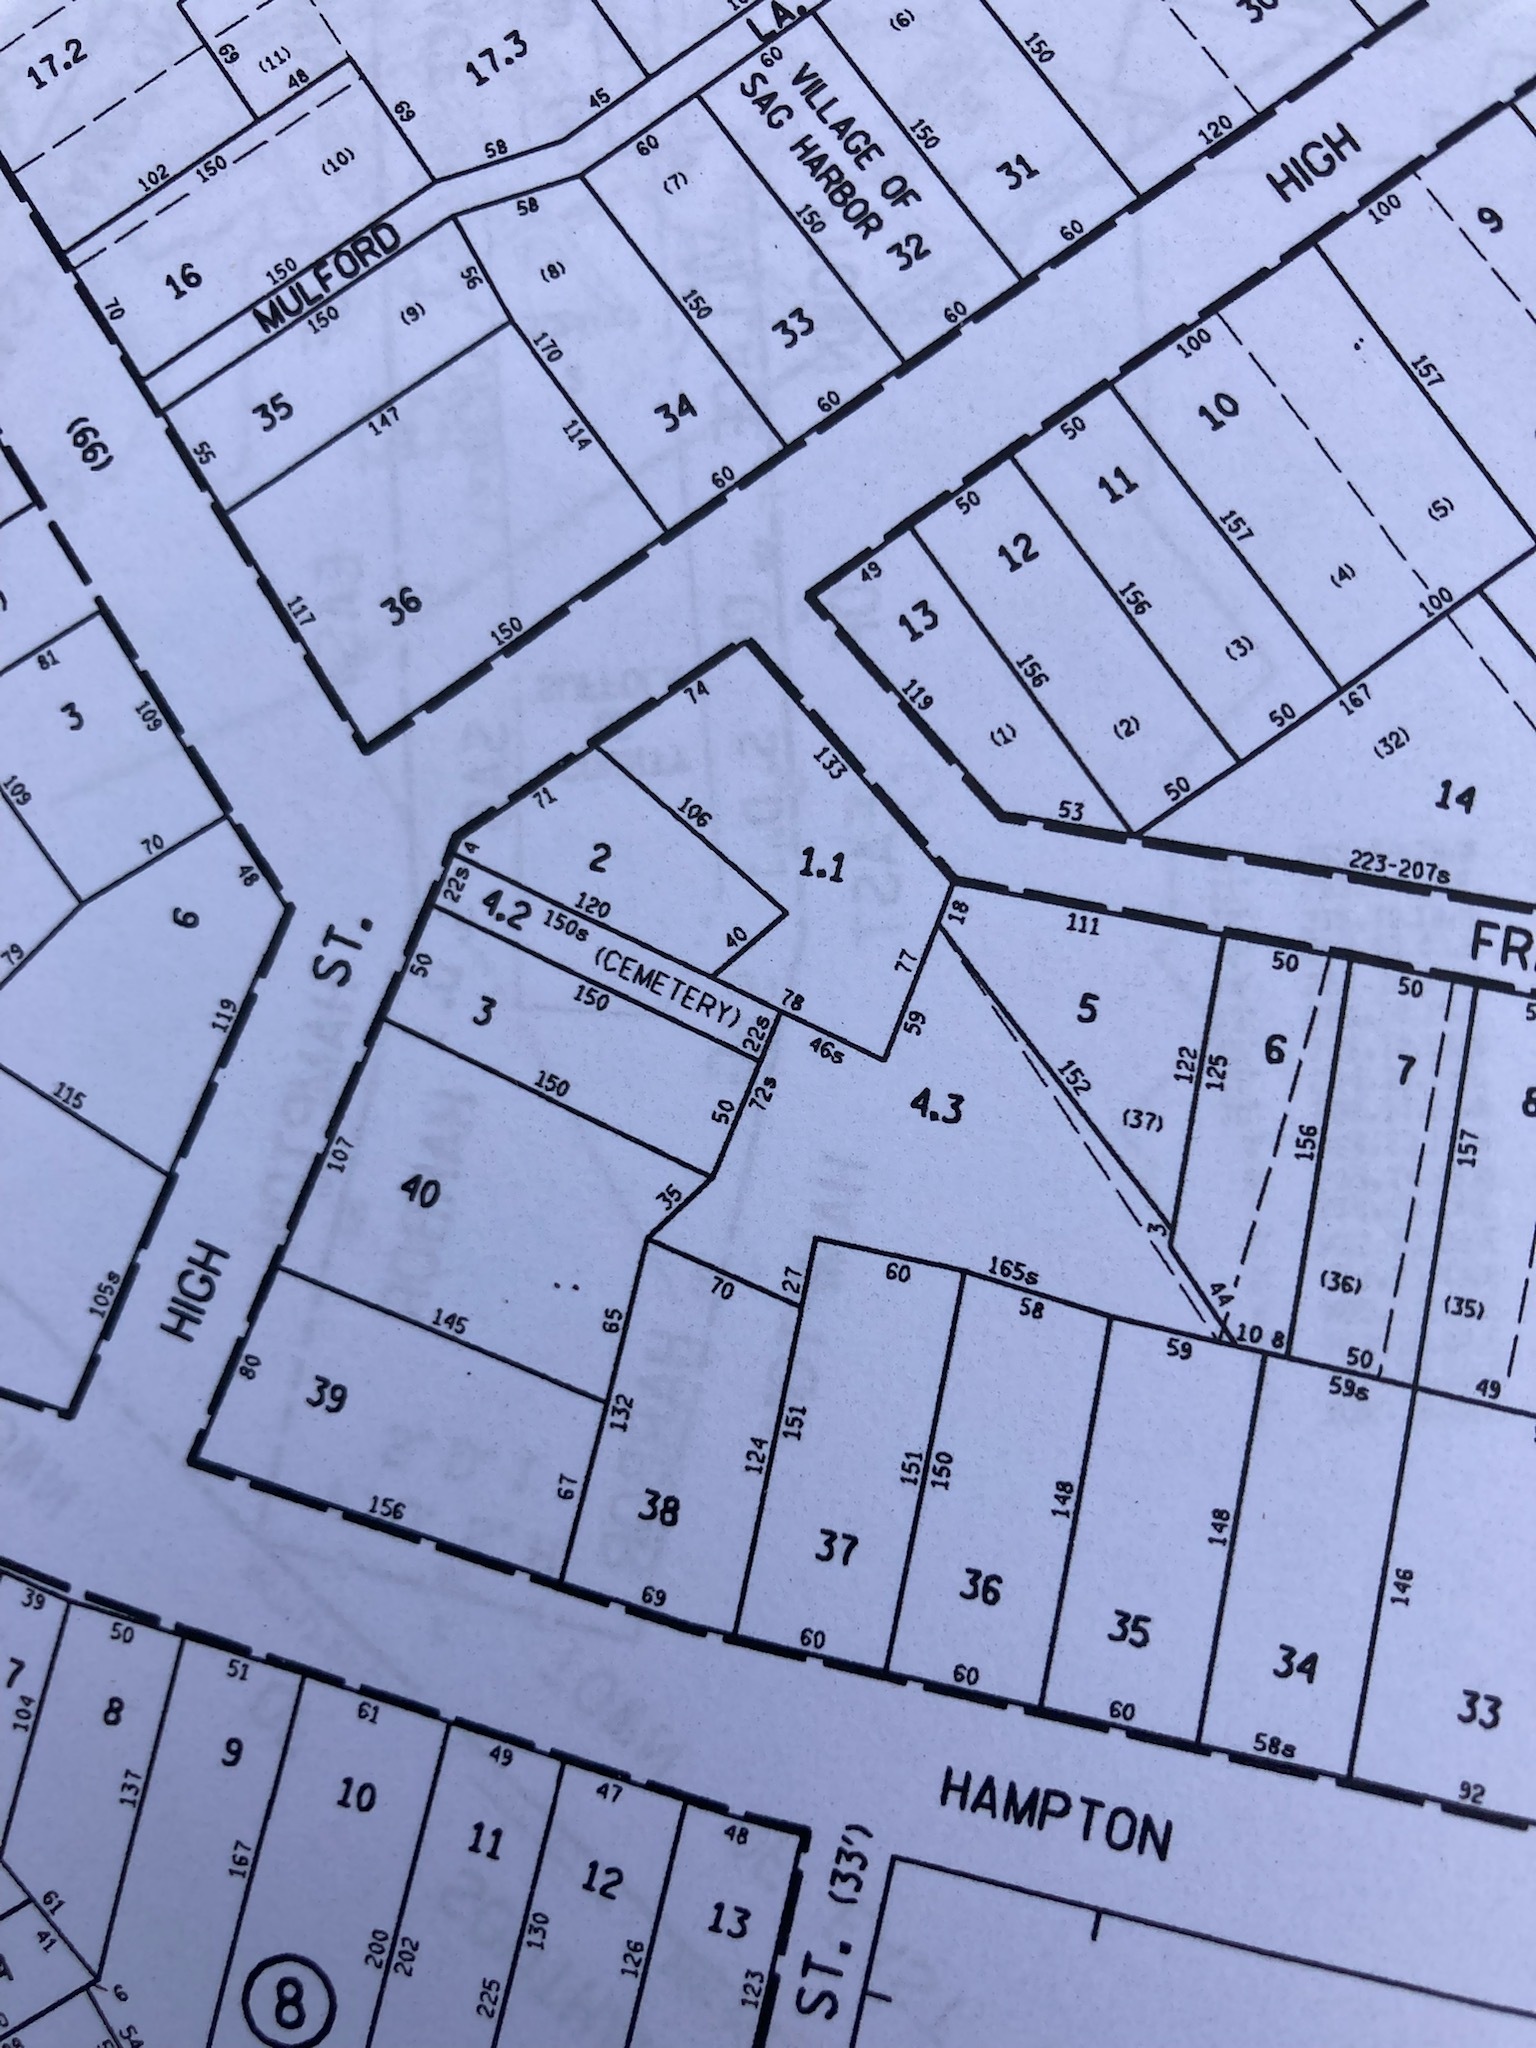 A Suffolk County tax map shows a thin strip labeled as cemetery.